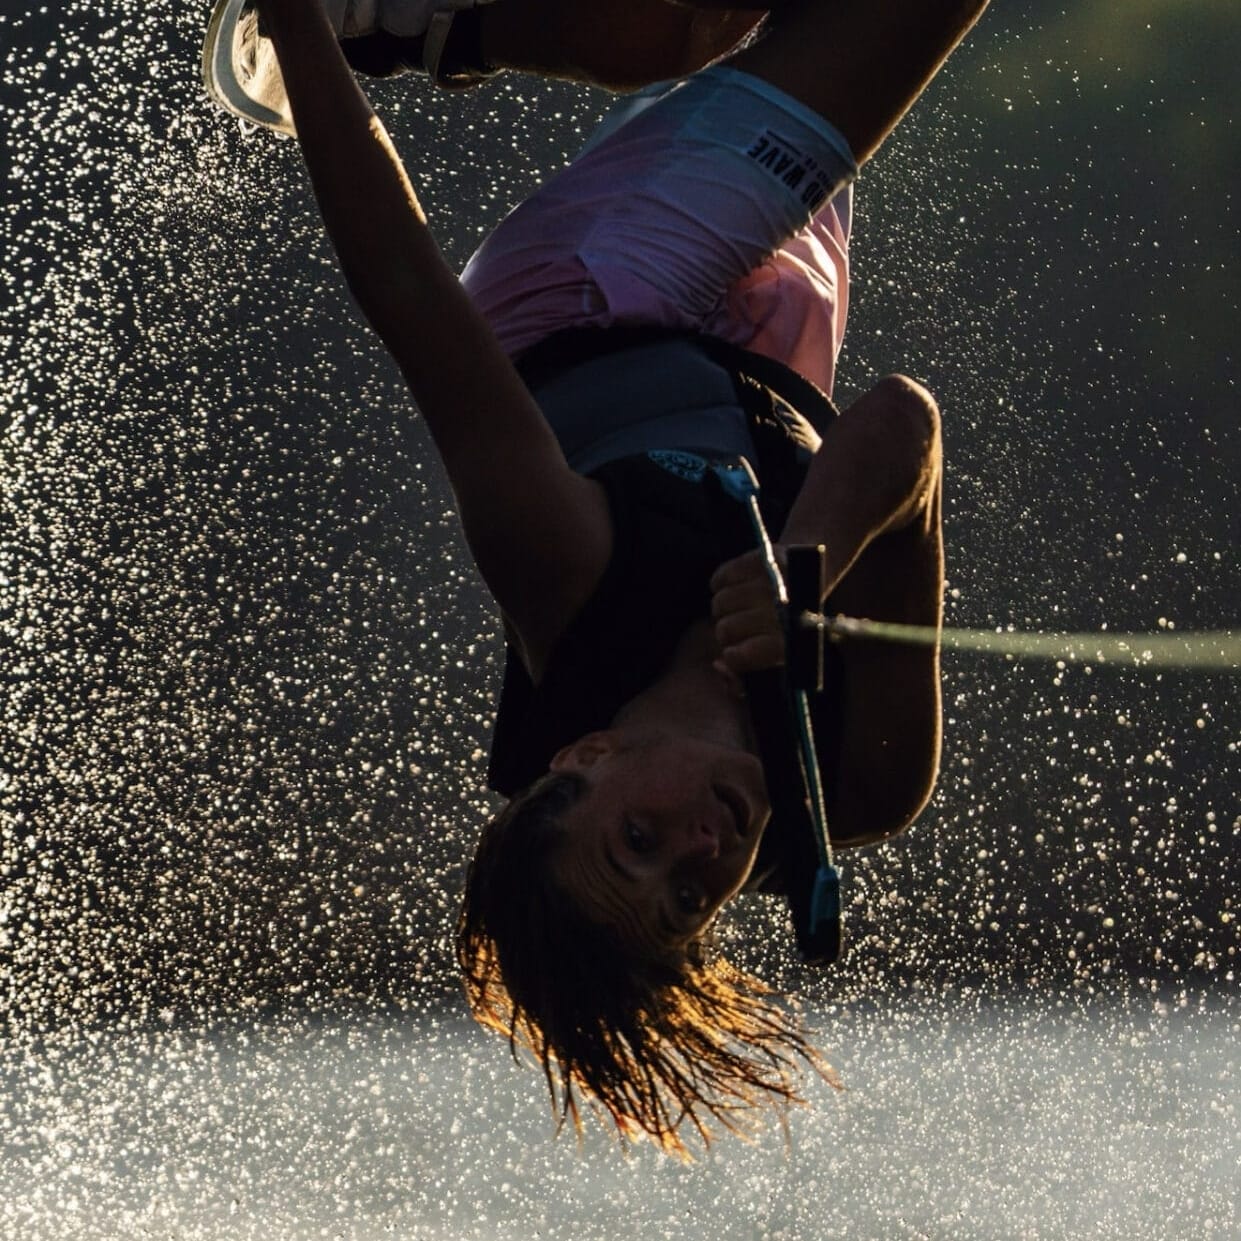 A wakeboarder performs an inverted trick, suspended in mid-air above water with droplets glistening in the sunlight.